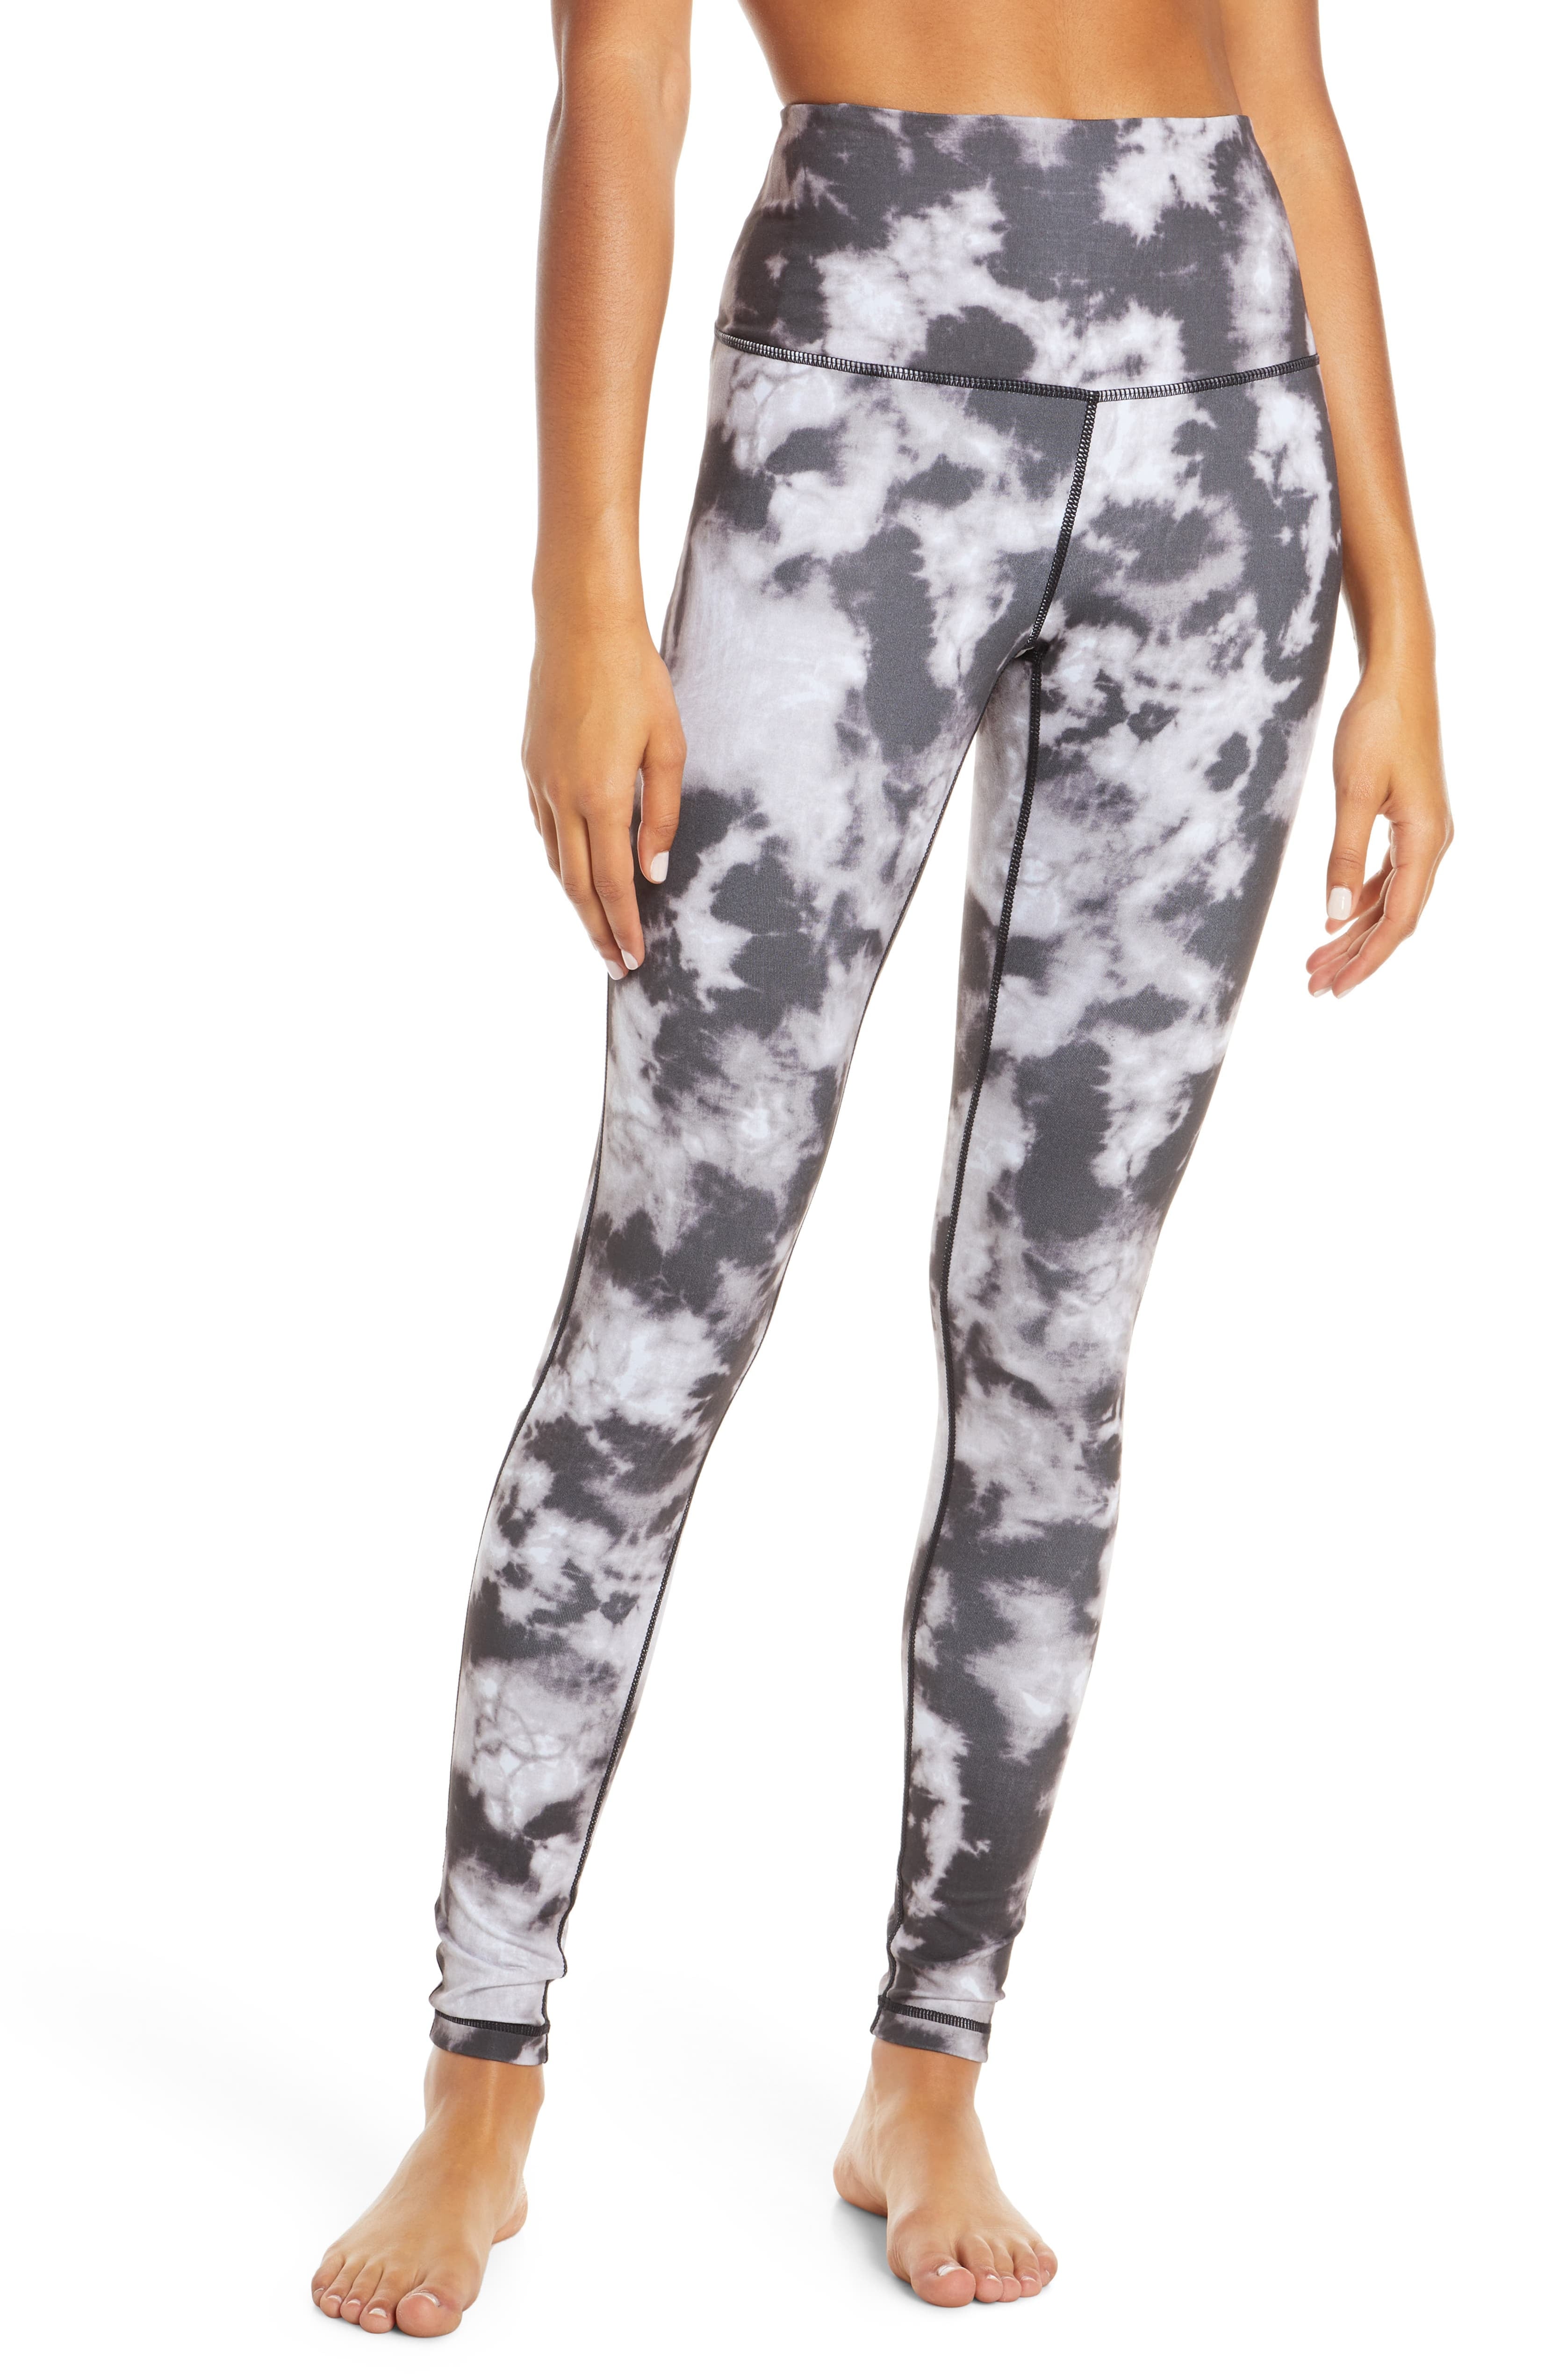 NEW Zella 'Live In' High Waist Leggings - Grey Forged - Small